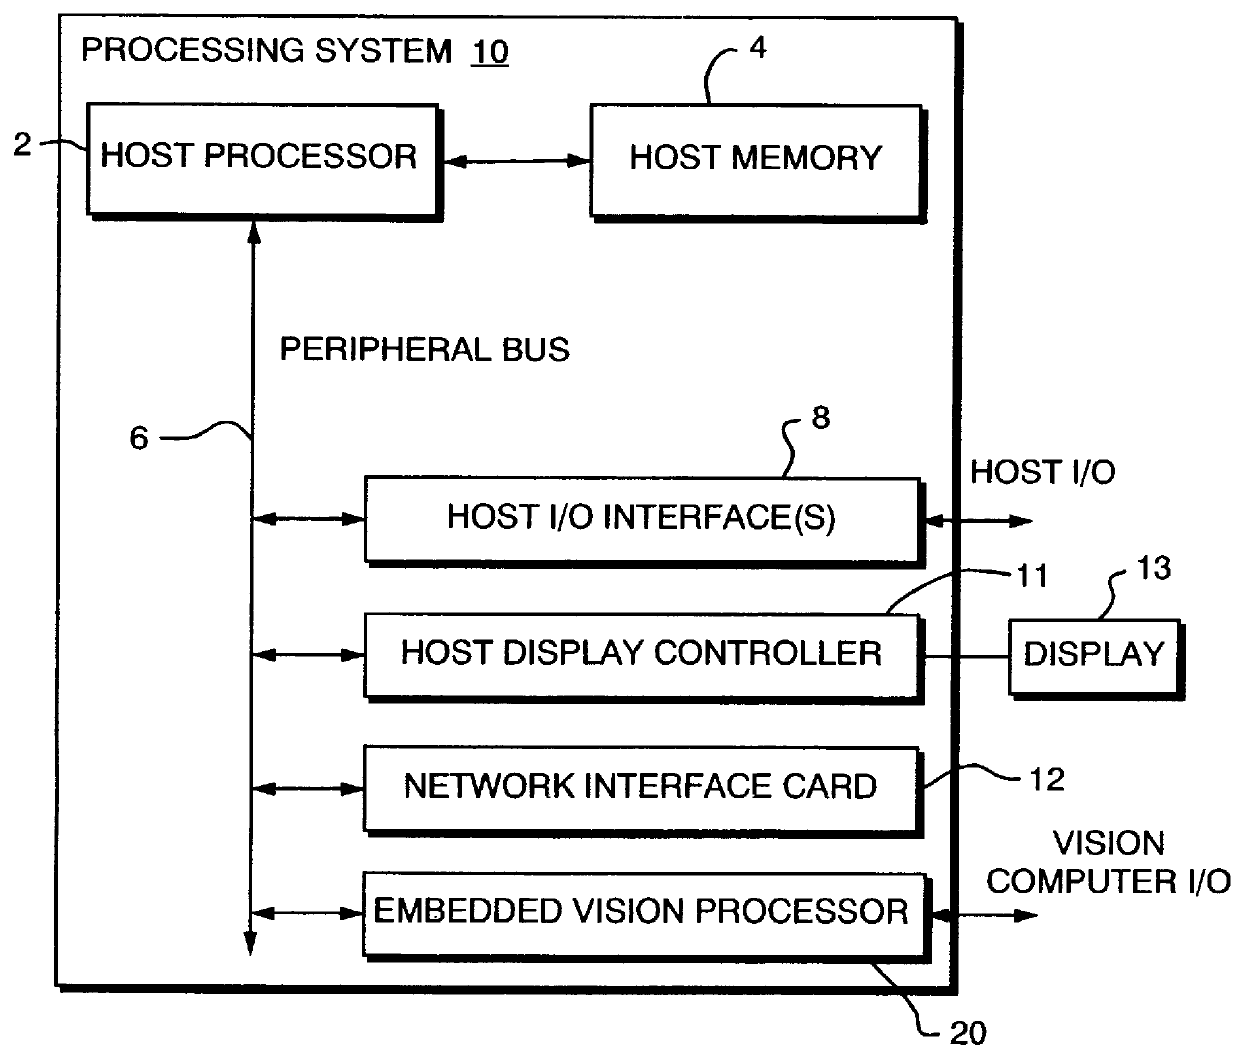 Apparent network interface for and between embedded and host processors